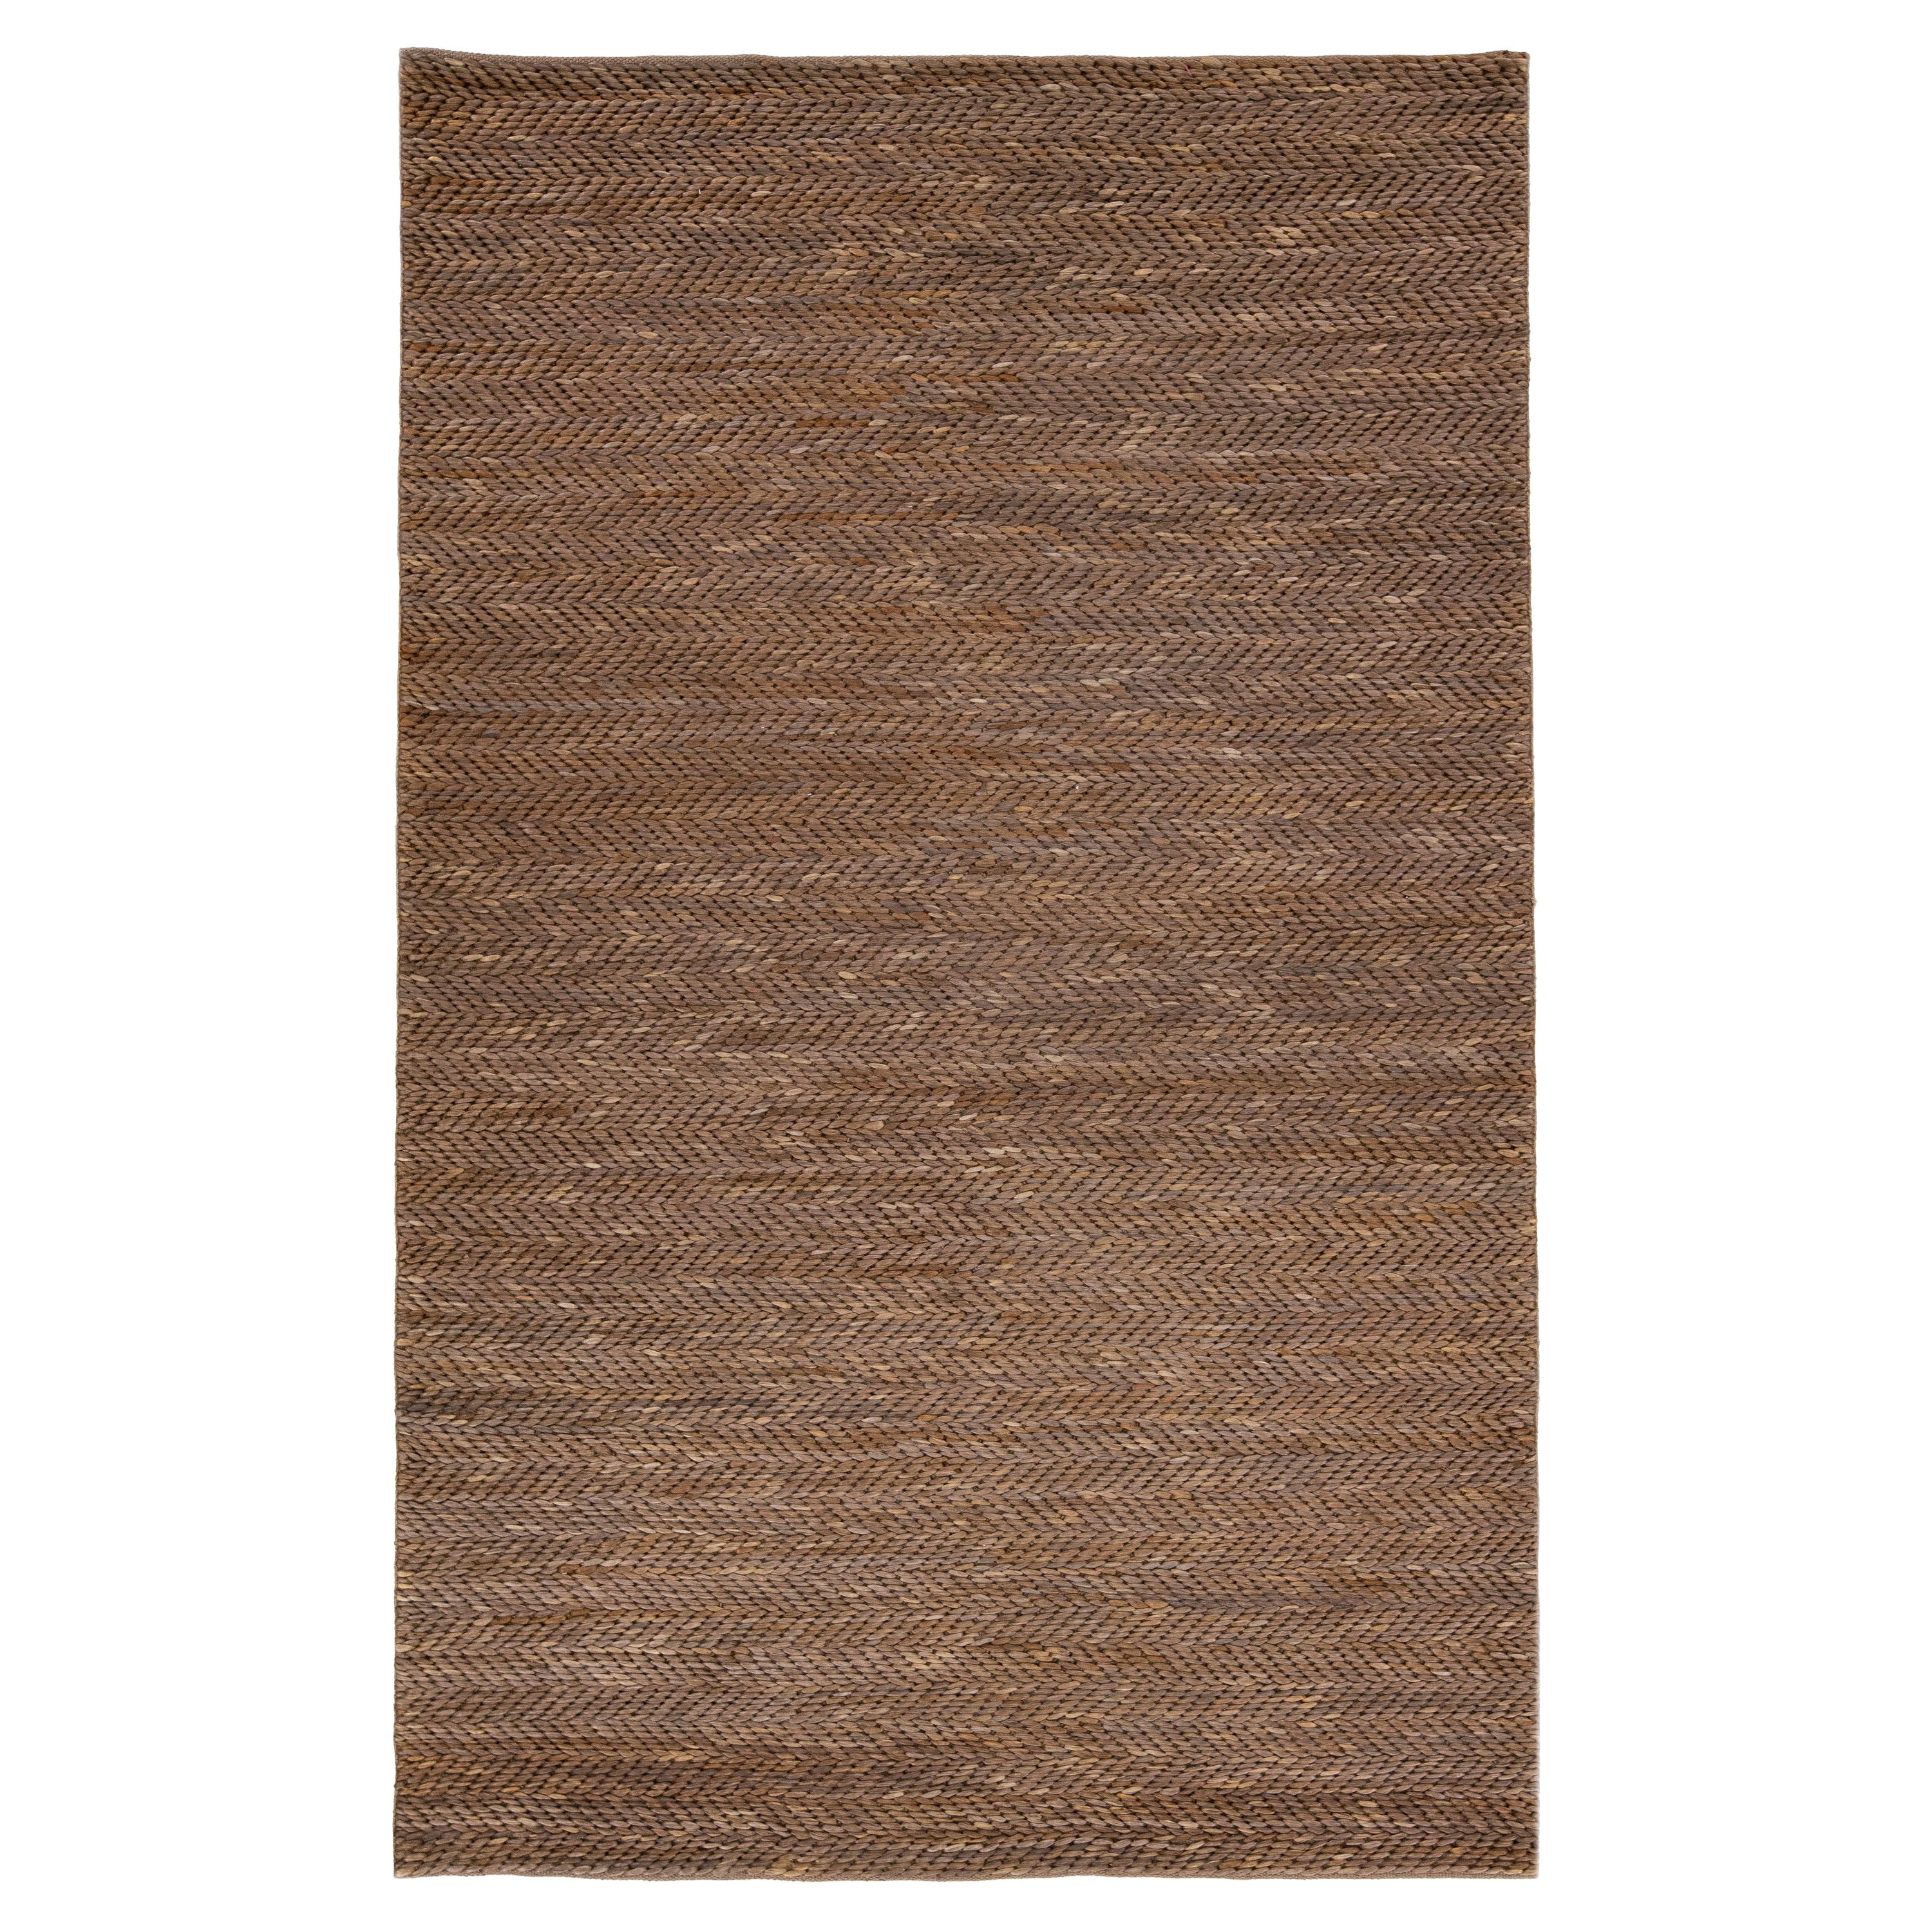 Modern Natural Texture Hand Woven Jute & Cotton Area Rug with Brown Color For Sale